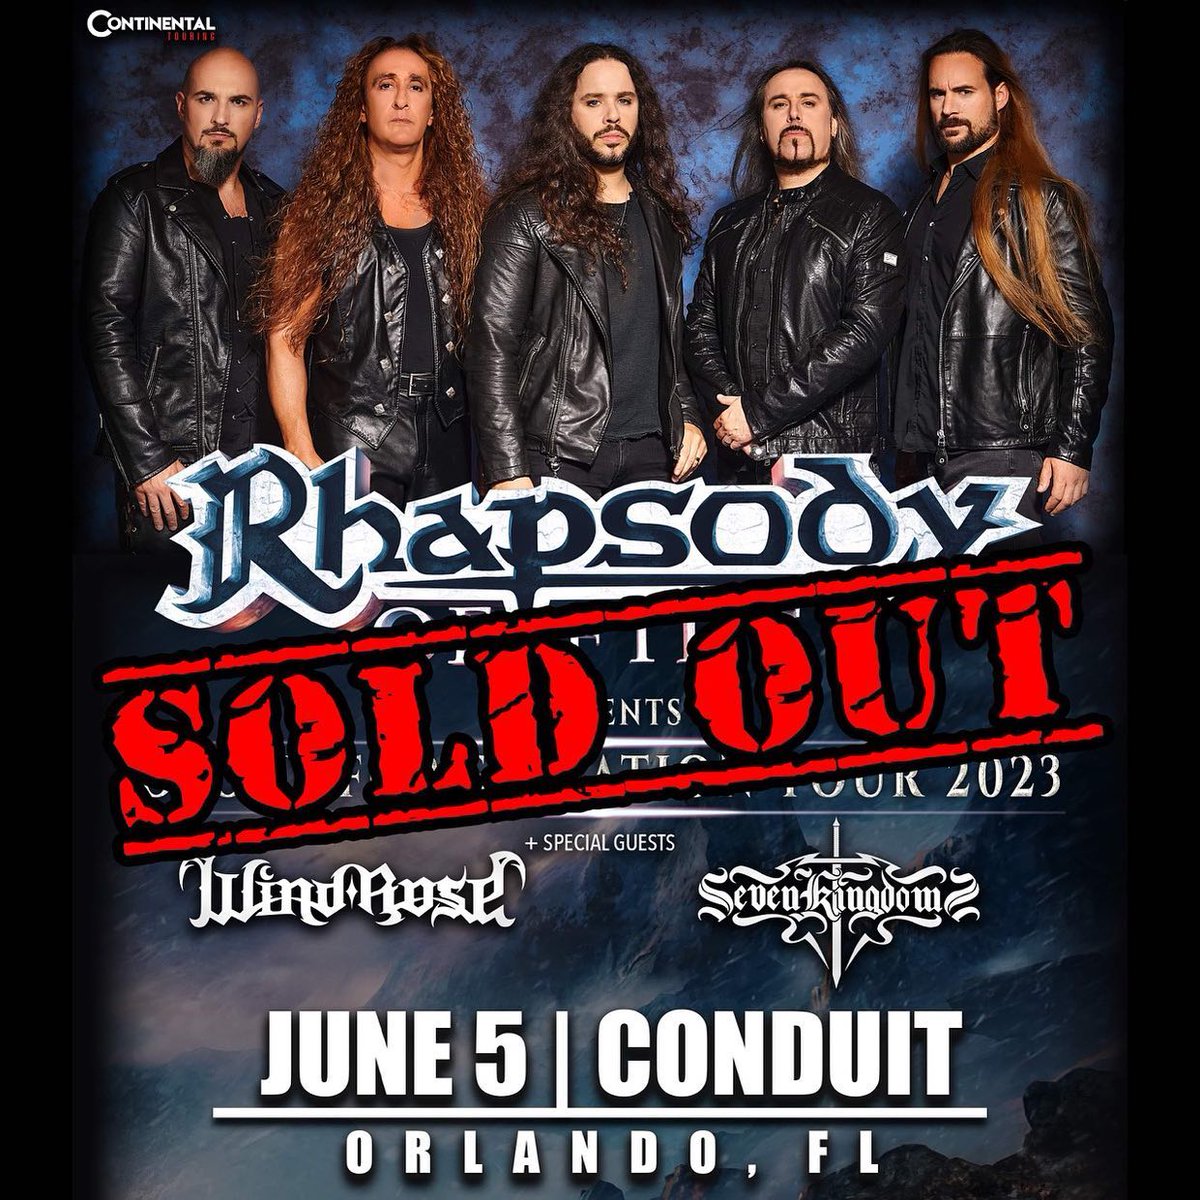 .@_rhapsodyoffire 
With: #windrose/#SevenKingdoms

Today: 6/5 Orlando, FL - Conduit 🇺🇸 SOLD OUT